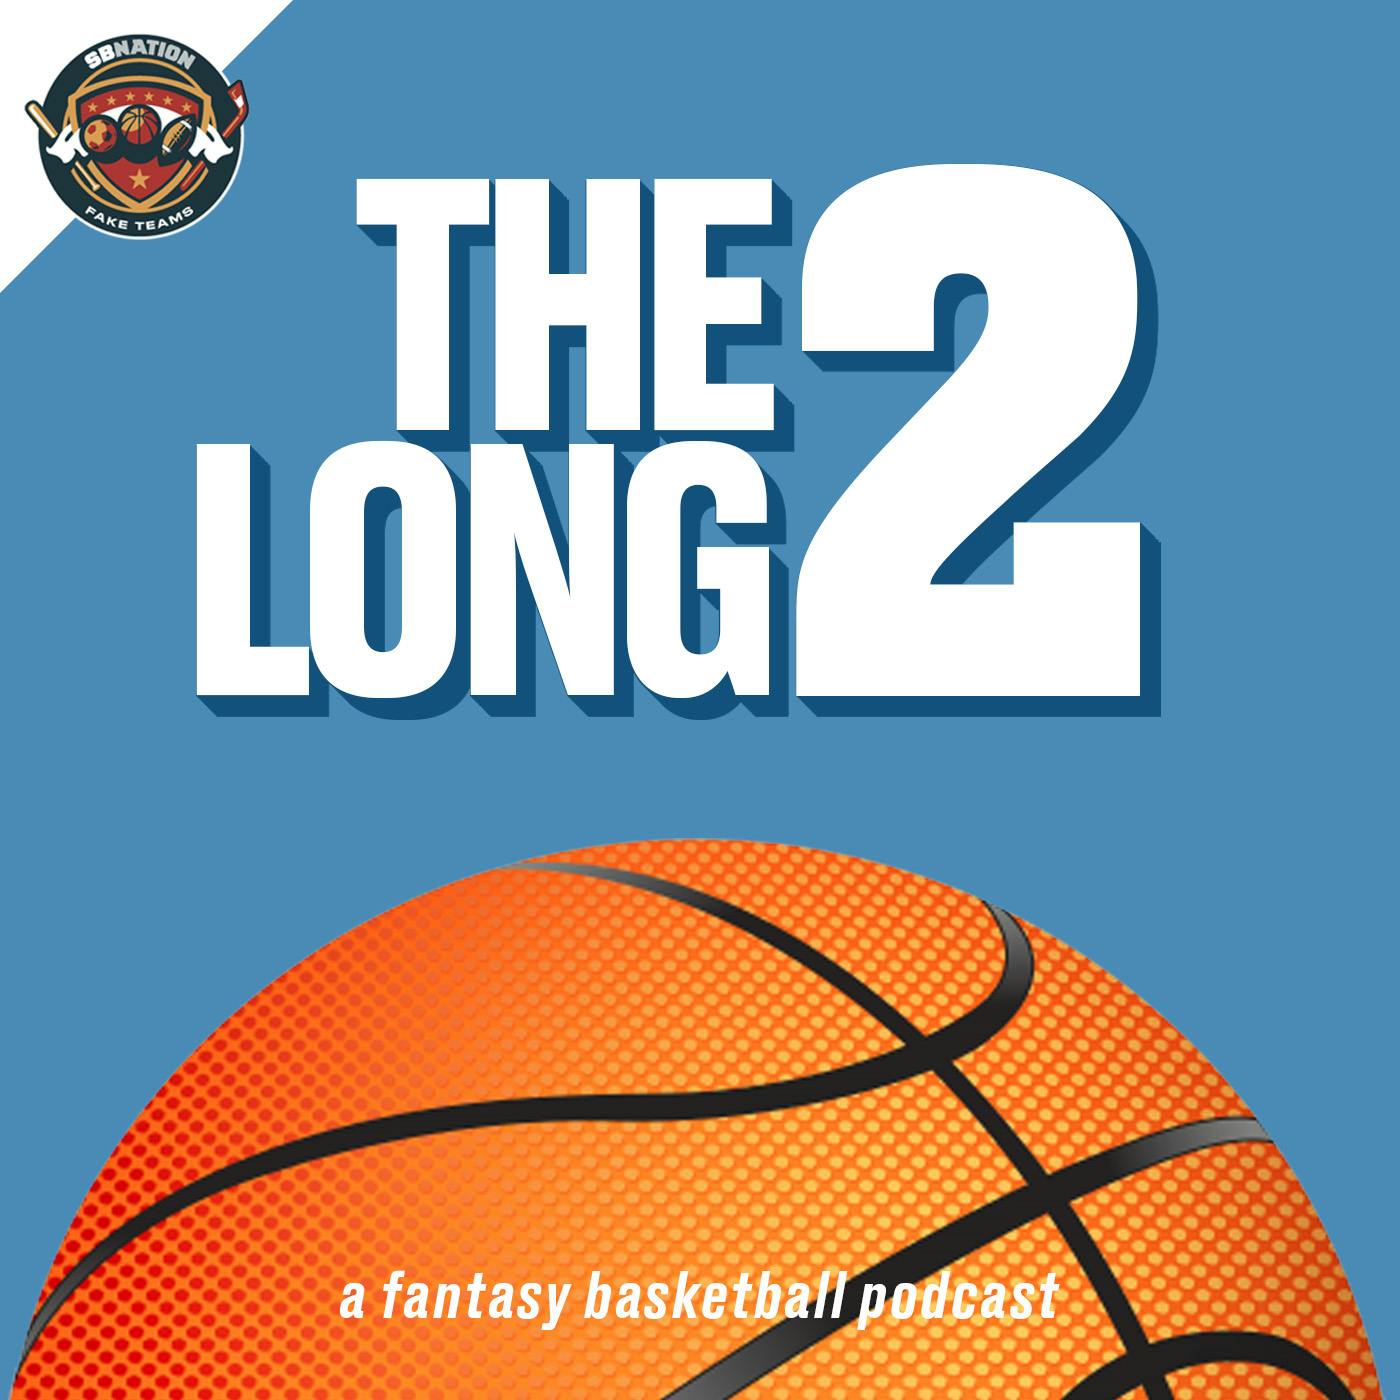 The Long Two #35 | Talking offseason moves that’d rock the NBA, is Giannis the Rockets’ missing piece, and Steve Nash’s white privilege